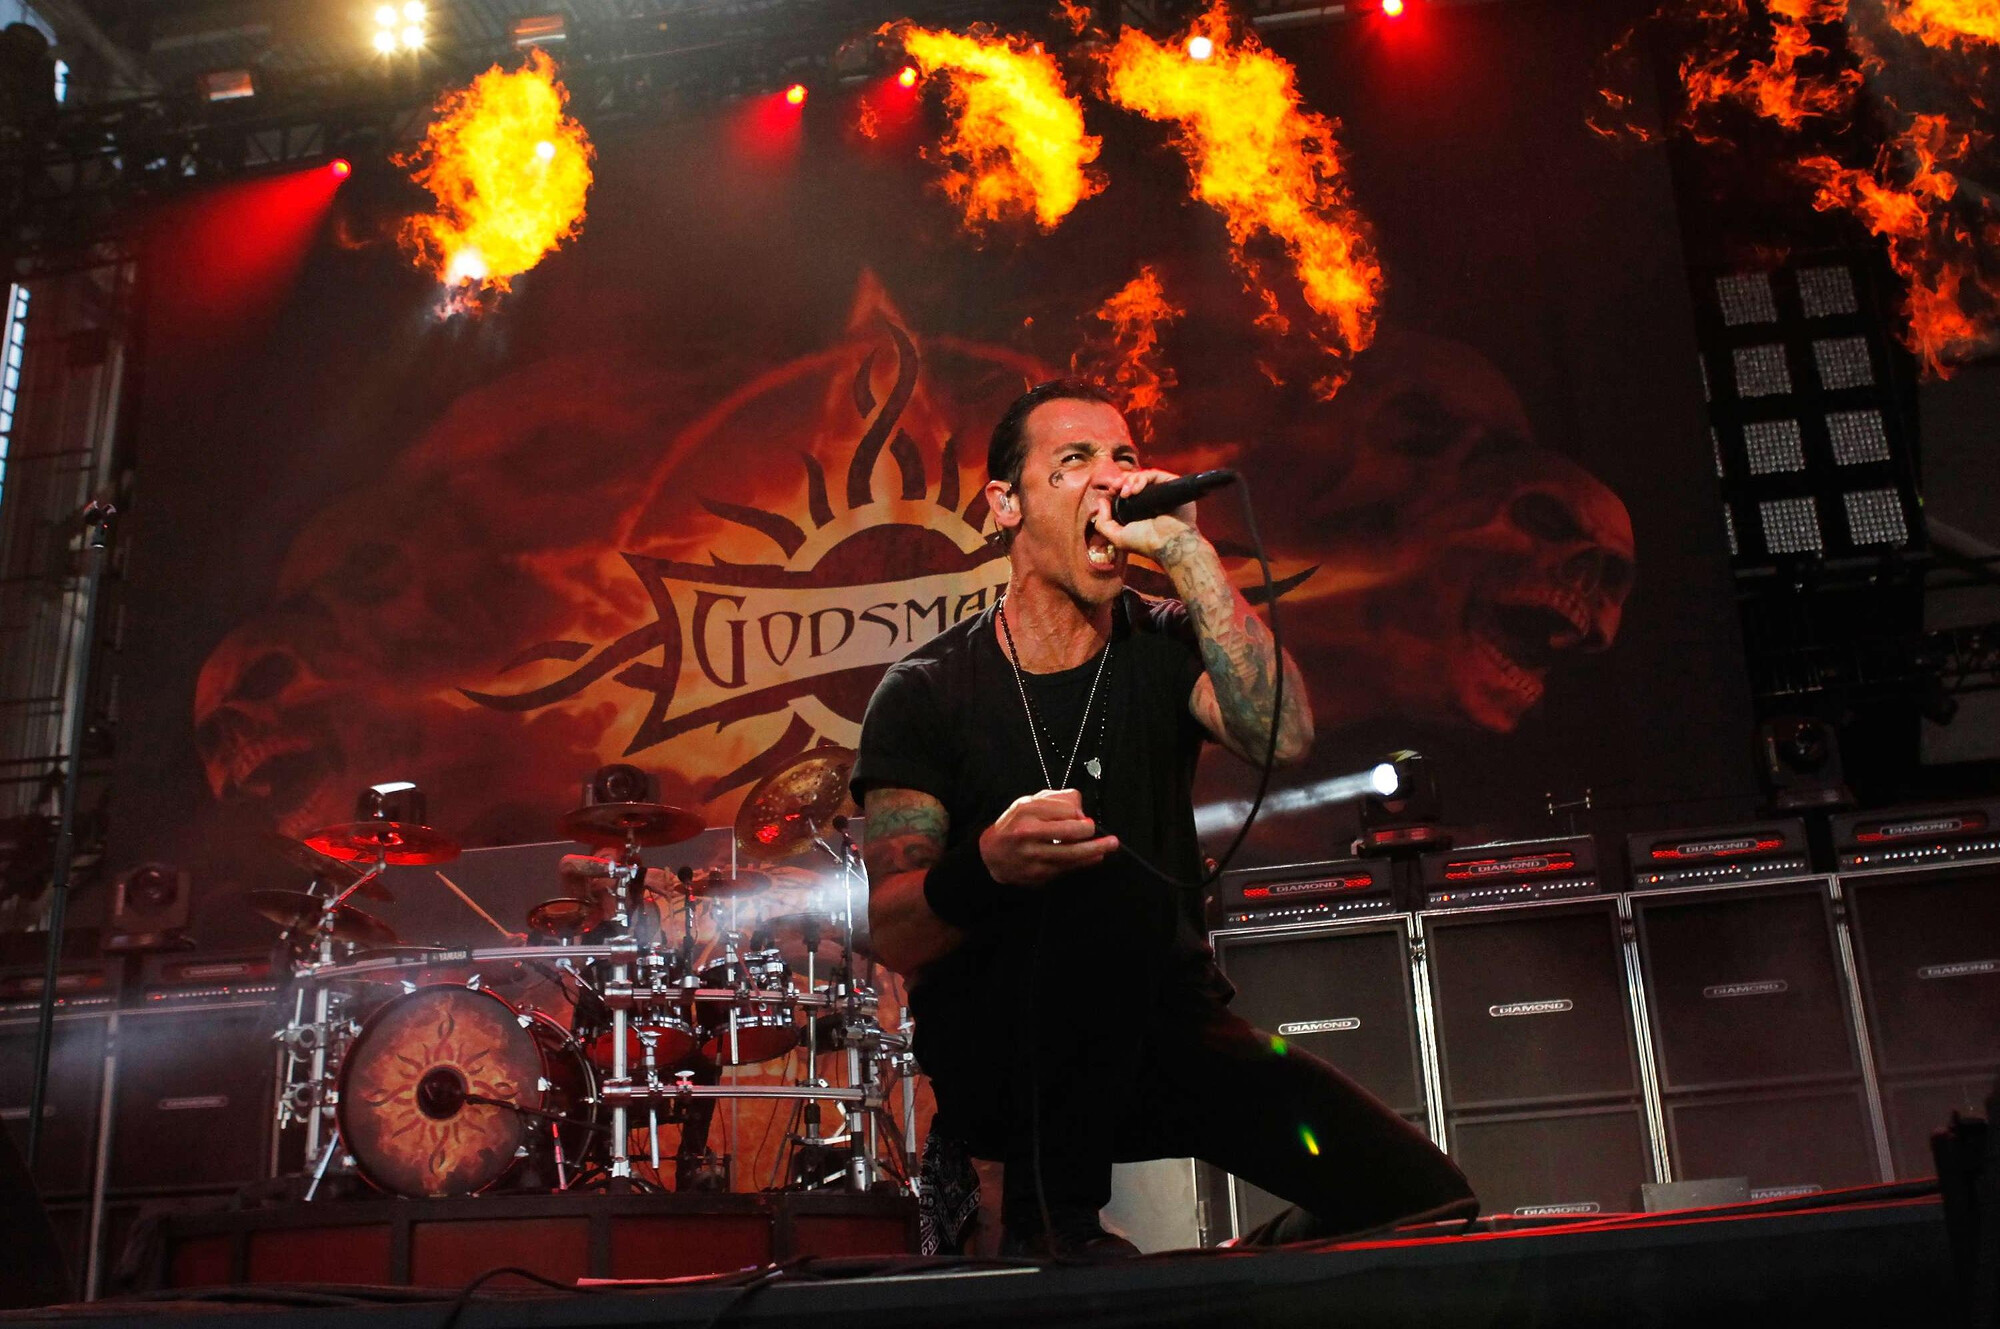 Godsmack: The band that has 25 top ten rock radio hits, Frontman and songwriter Sully Erna. 2000x1330 HD Wallpaper.